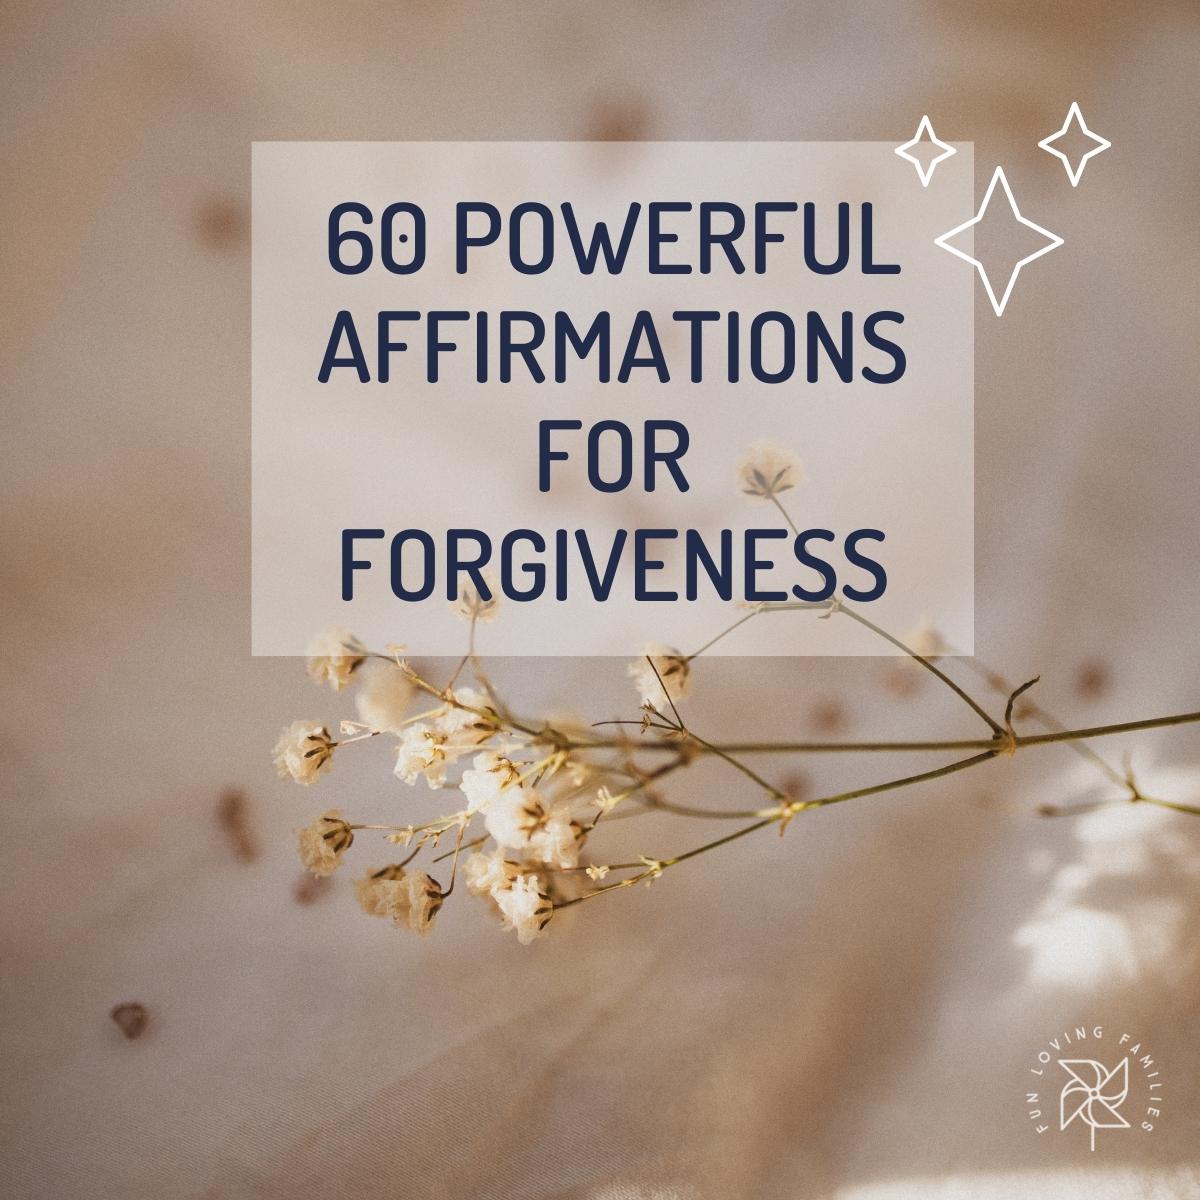 60 Powerful Affirmations for Forgiveness